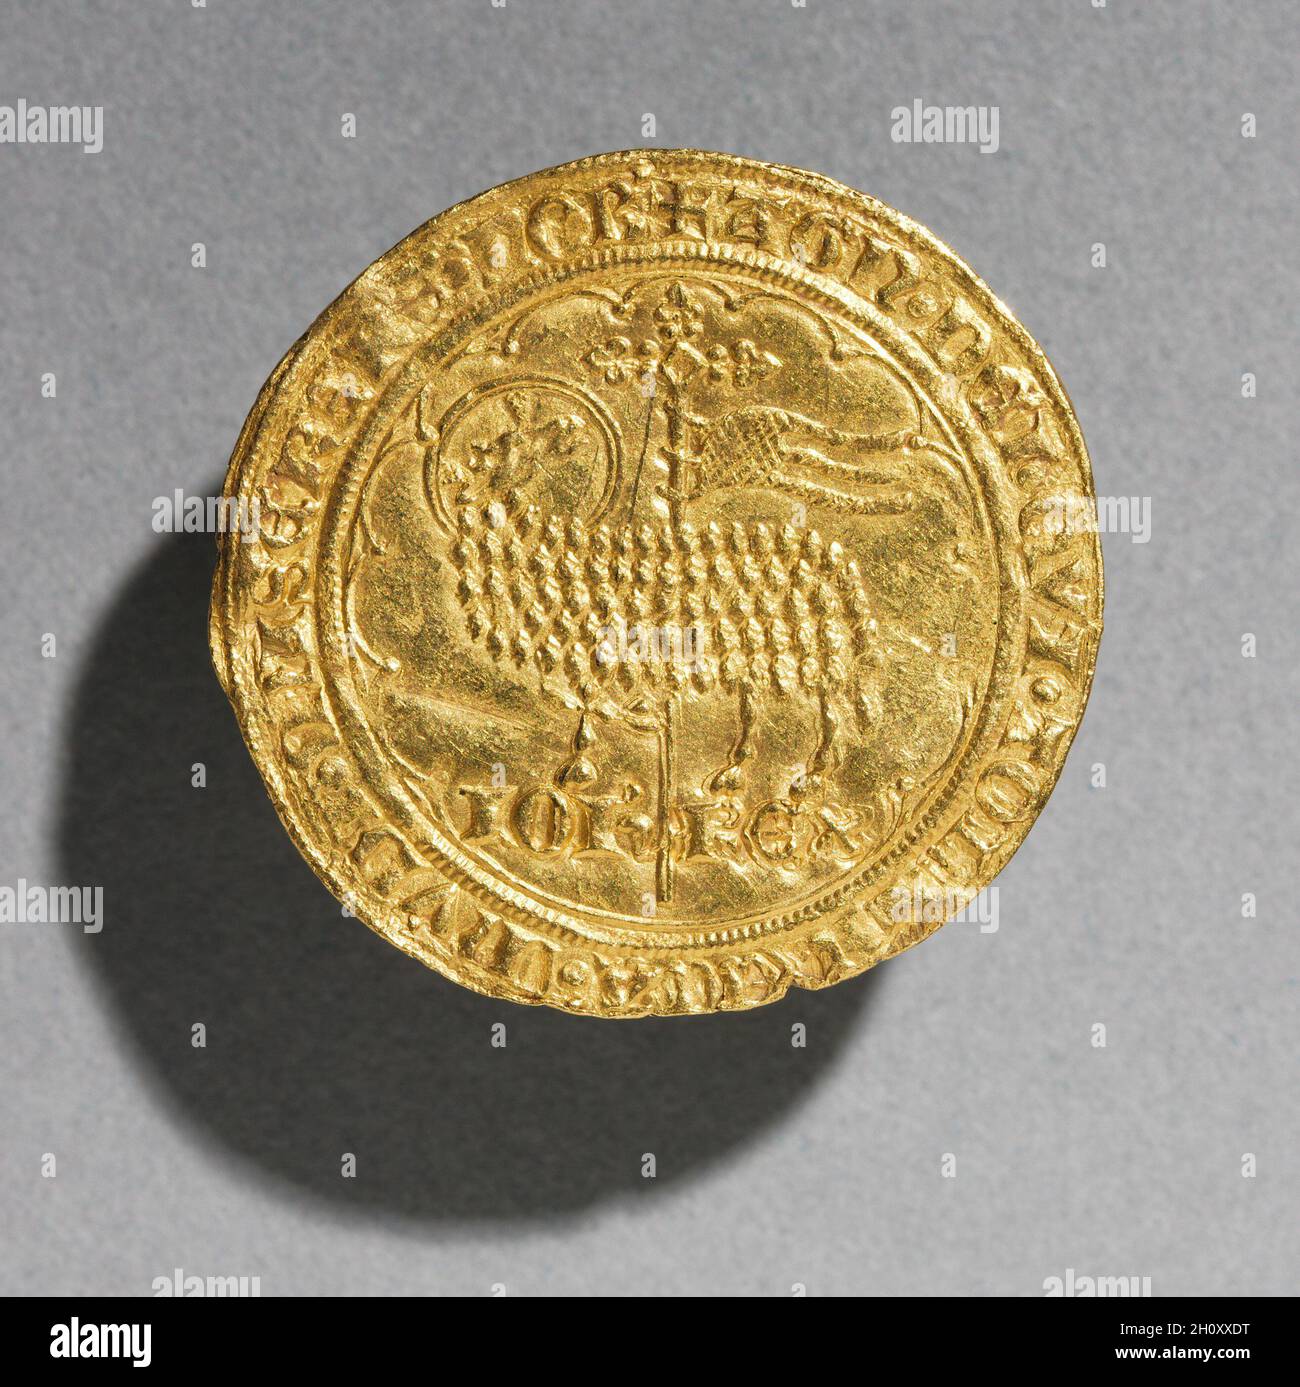 Mouton d'Or of King Jean le Bon of France, 1350-1364 (obverse), 1350-1364. France, Gothic period, 14th century. Gold; diameter: 3.1 cm (1 1/4 in.).  Because this gold coin represents the Paschal Lamb, a symbol of Christ, on one of its faces, it is known as a 'Golden Sheep'--Mouton d'Or in French. Stock Photo